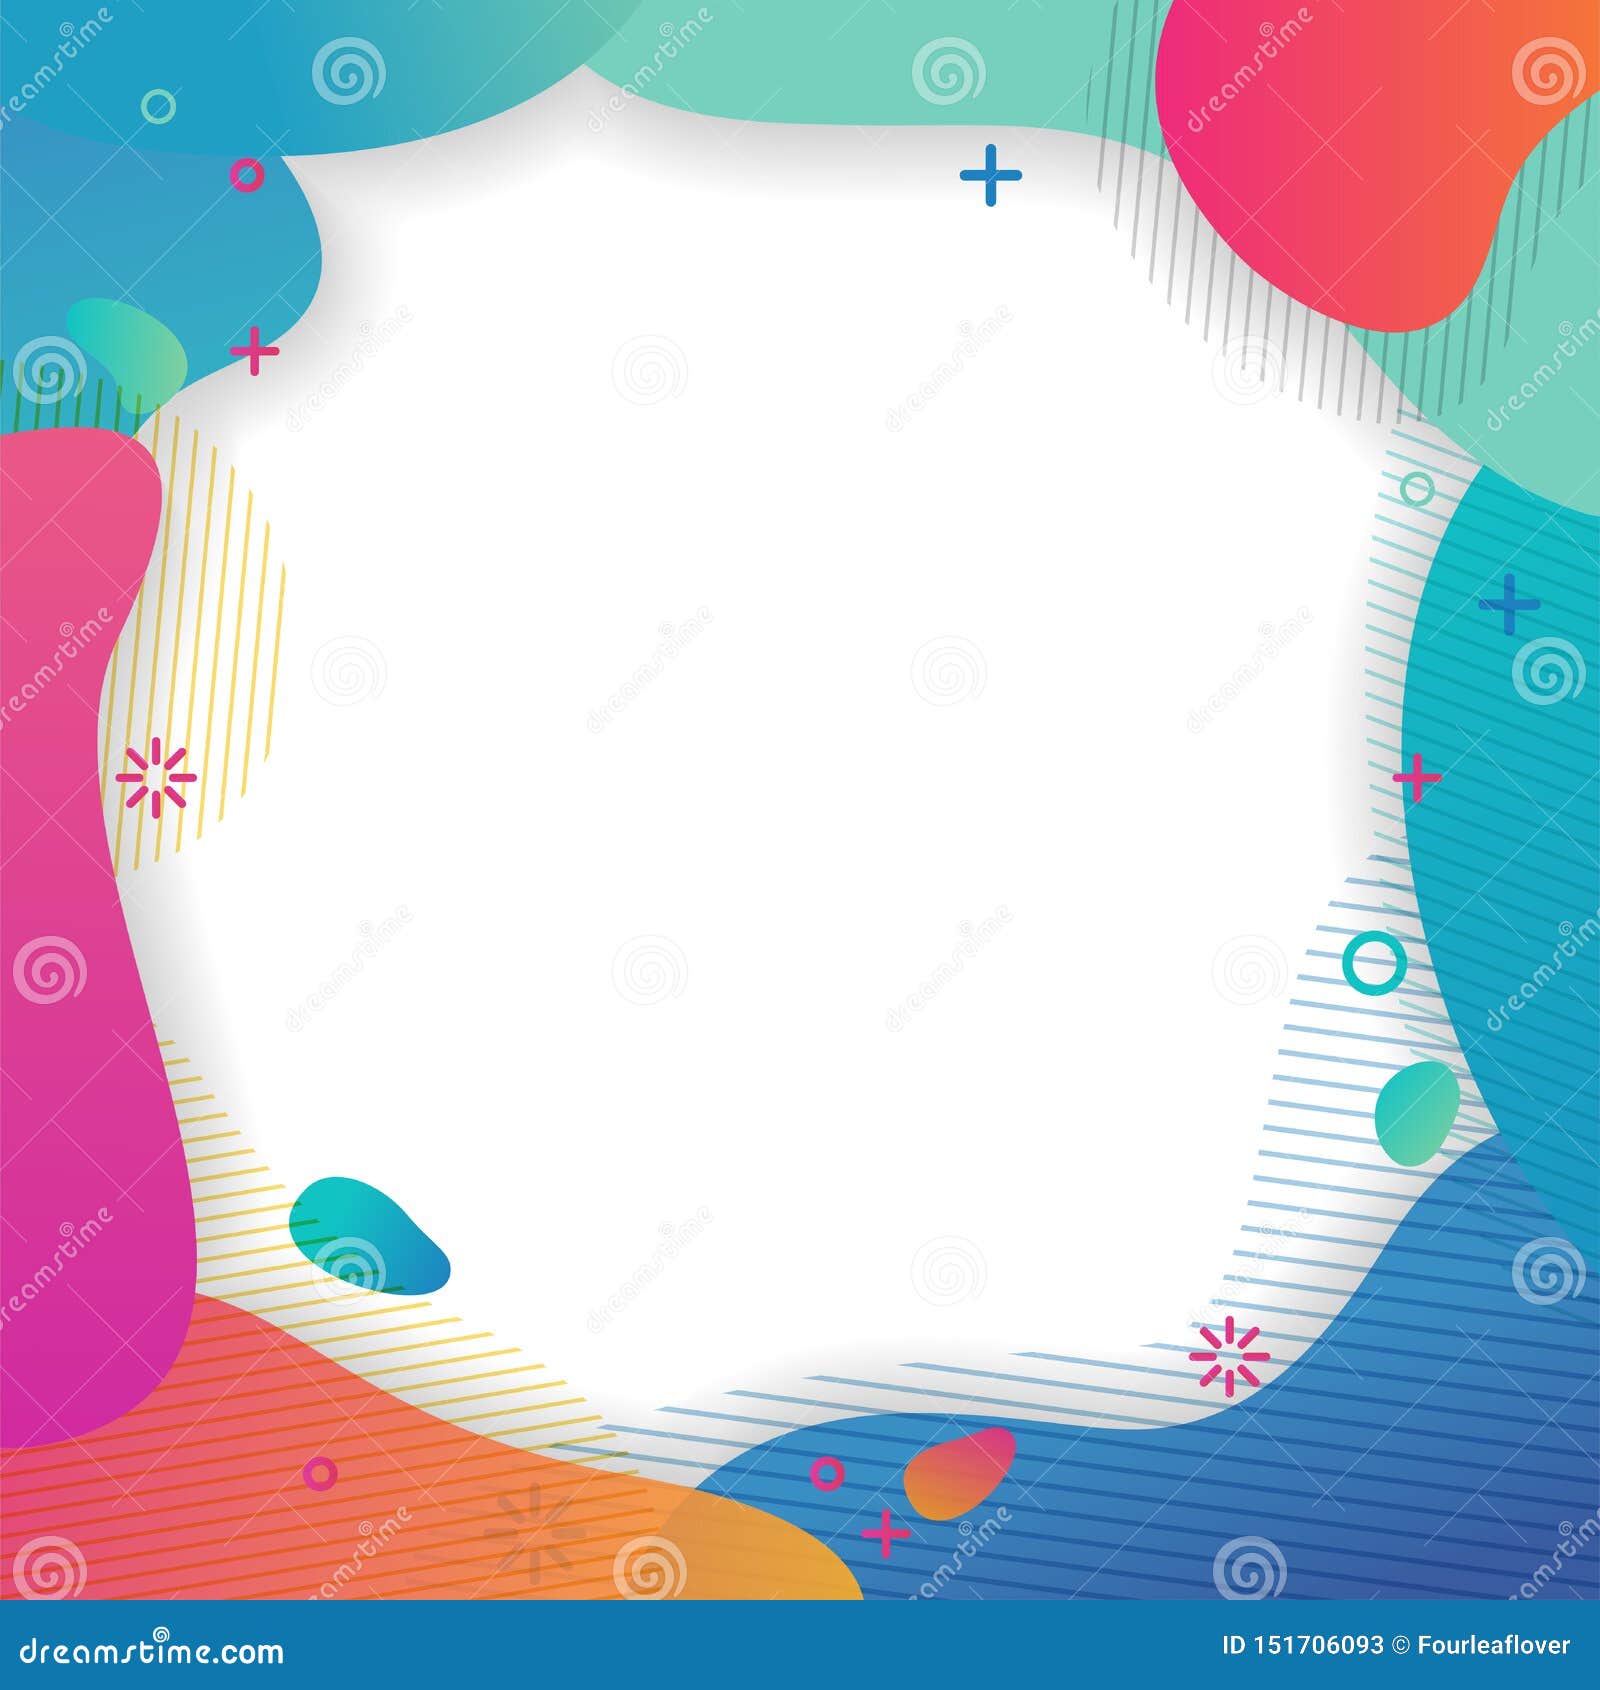 Set of Abstract Creative Universal Artistic Templates. Stock Vector ...